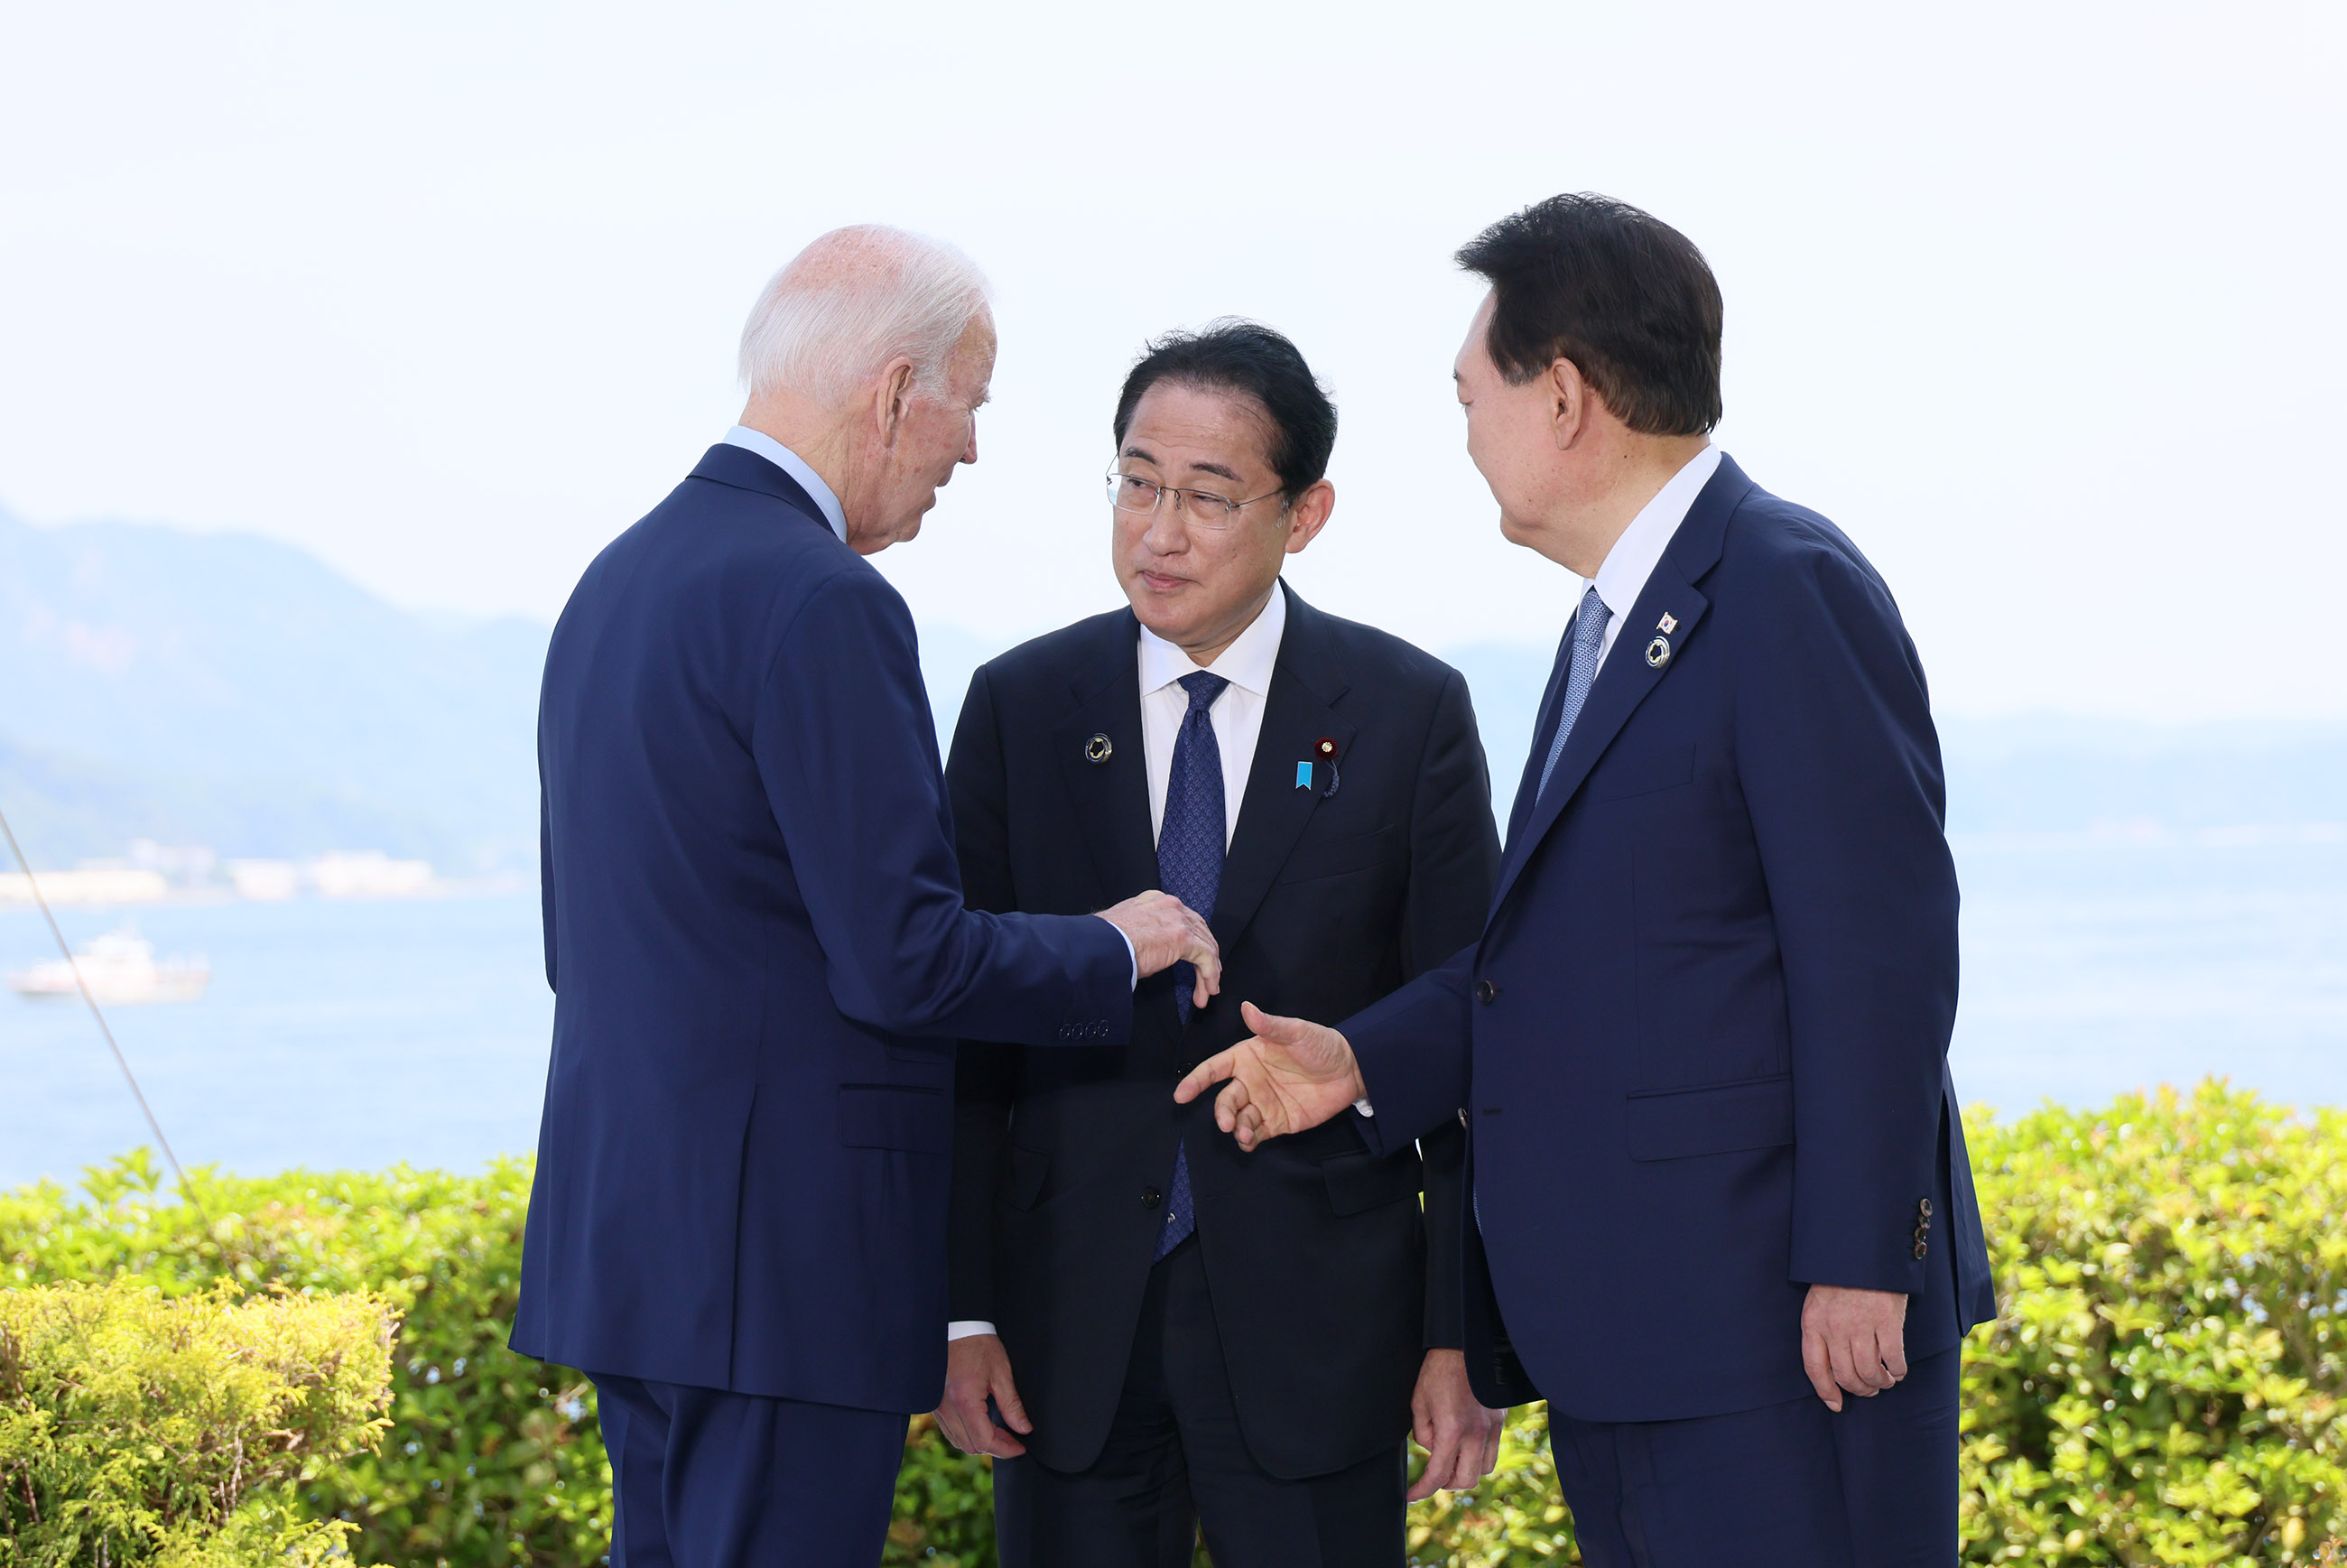 G7 Hiroshima Summit (Third Day): Bilateral Meetings with the Invited Countries